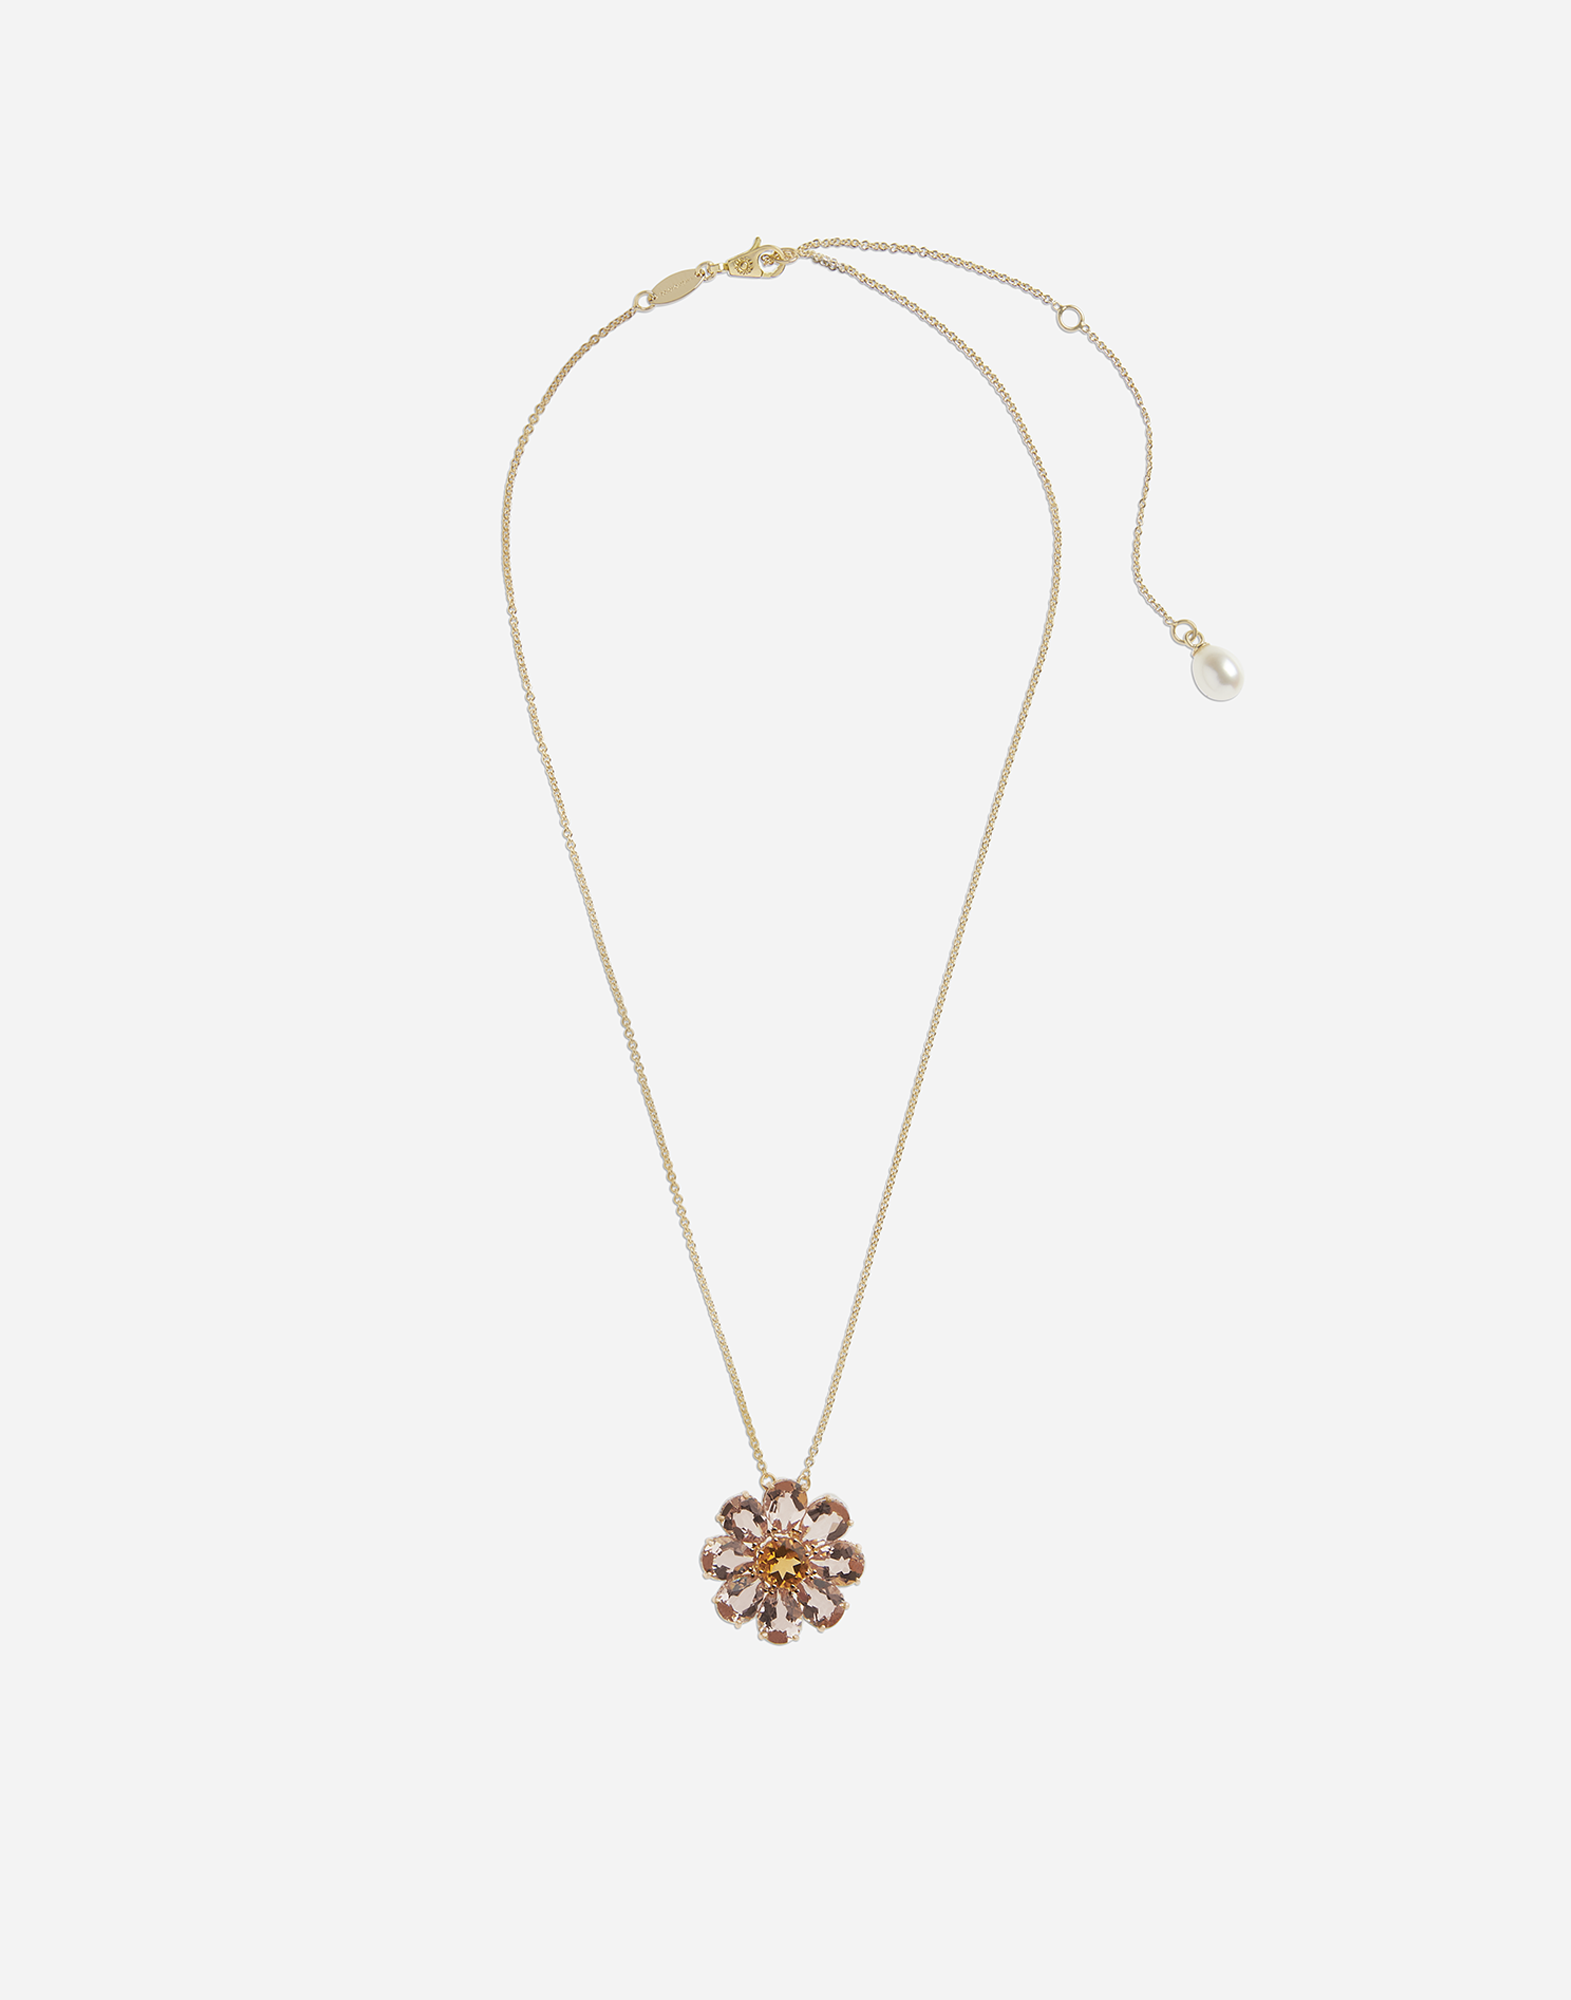 Necklace with red gold flower pendant in Gold